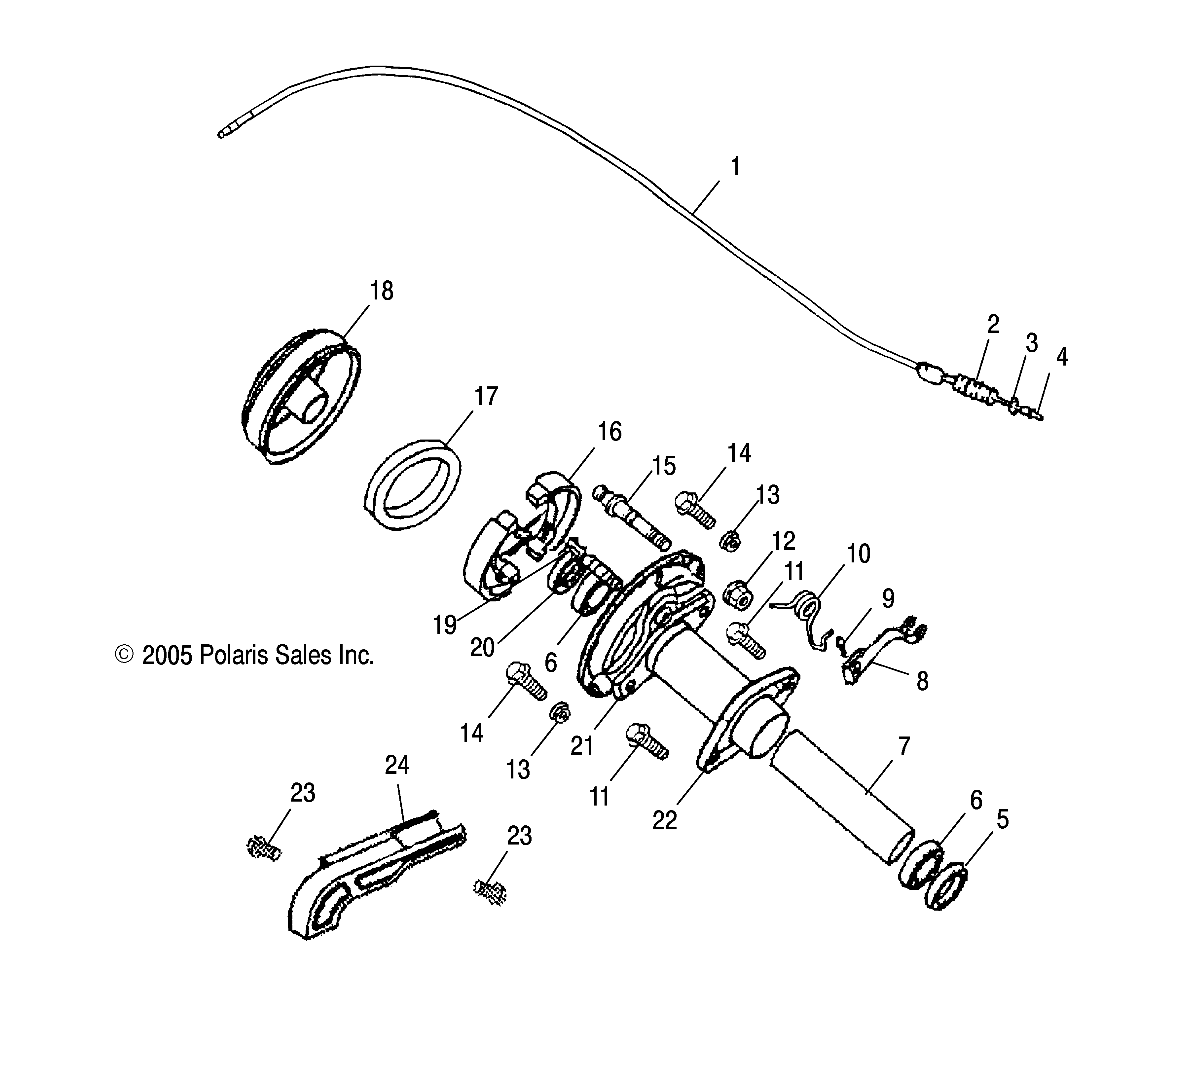 Part Number : 0450435 SPRING-CABLE REAR BRAKE